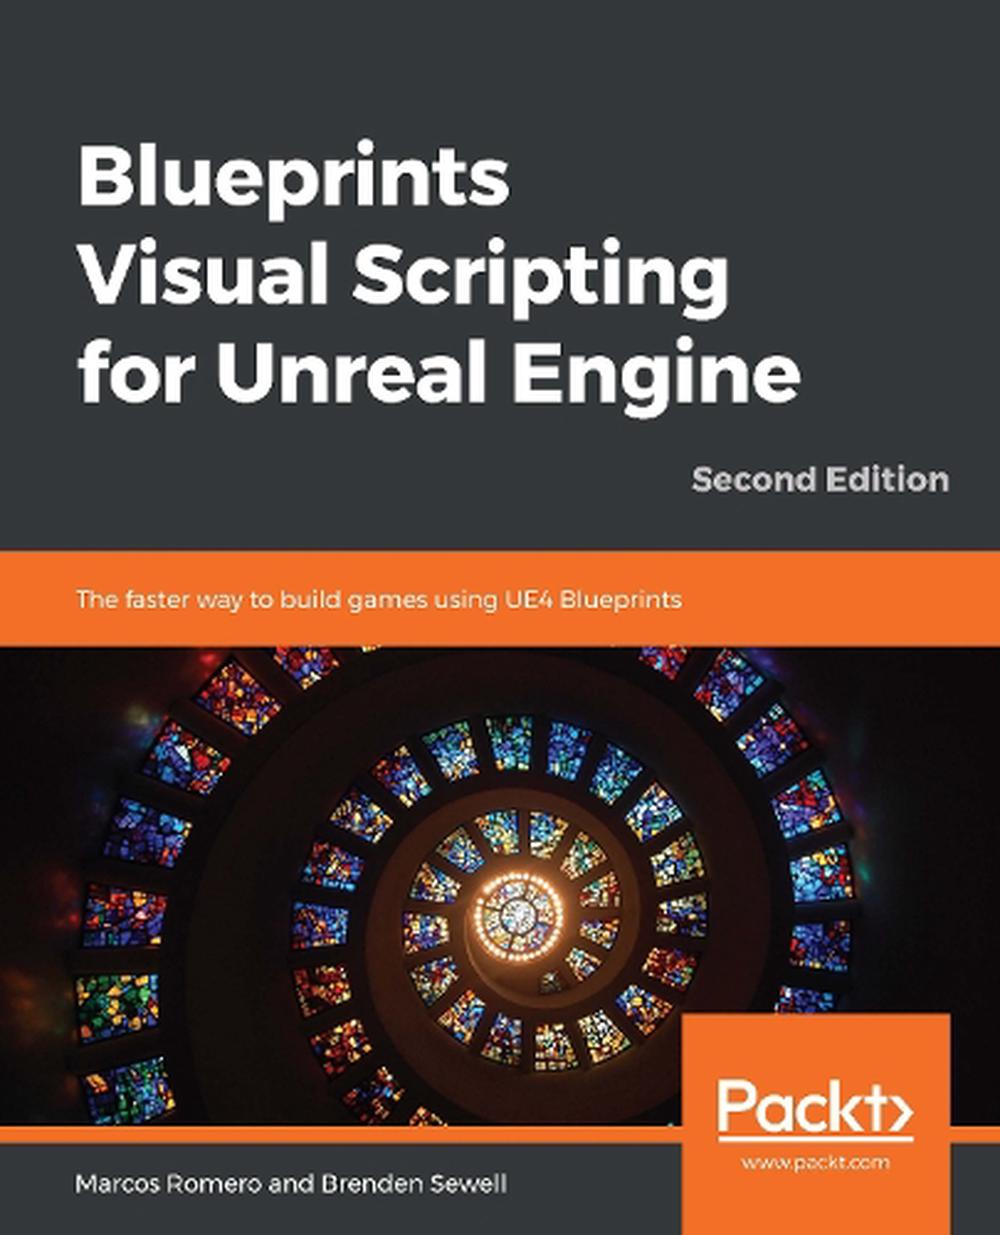 Blueprints Visual Scripting For Unreal Engine By Marcos Romero Free Shipping Ebay